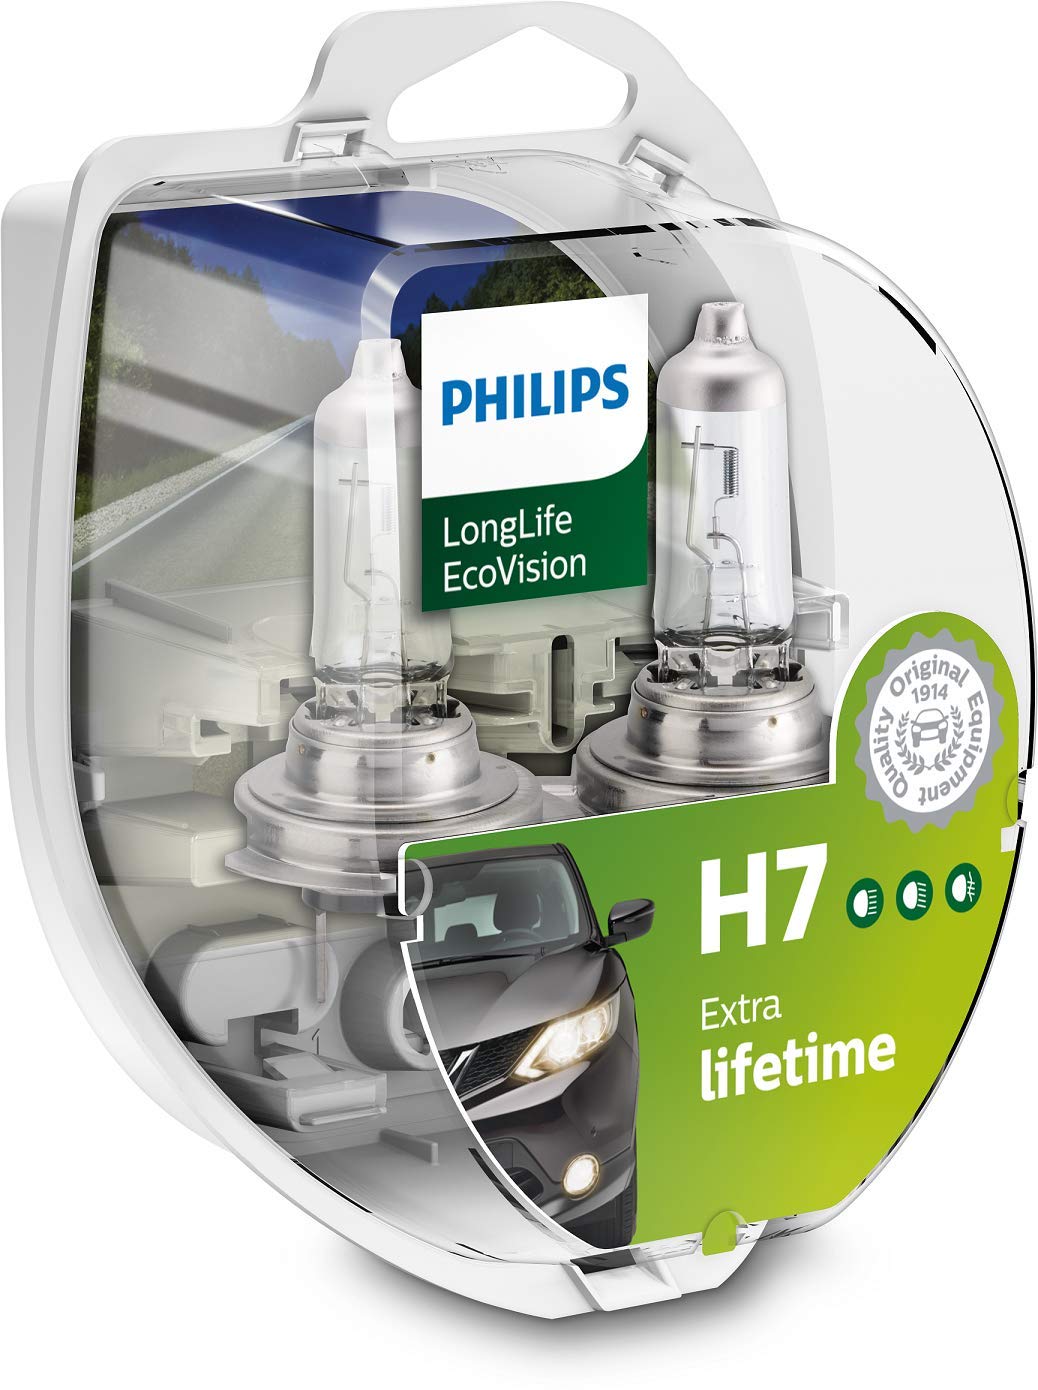 PHILIPS 12972LLECOS2 Glühlampe LongLife EcoVision von Philips